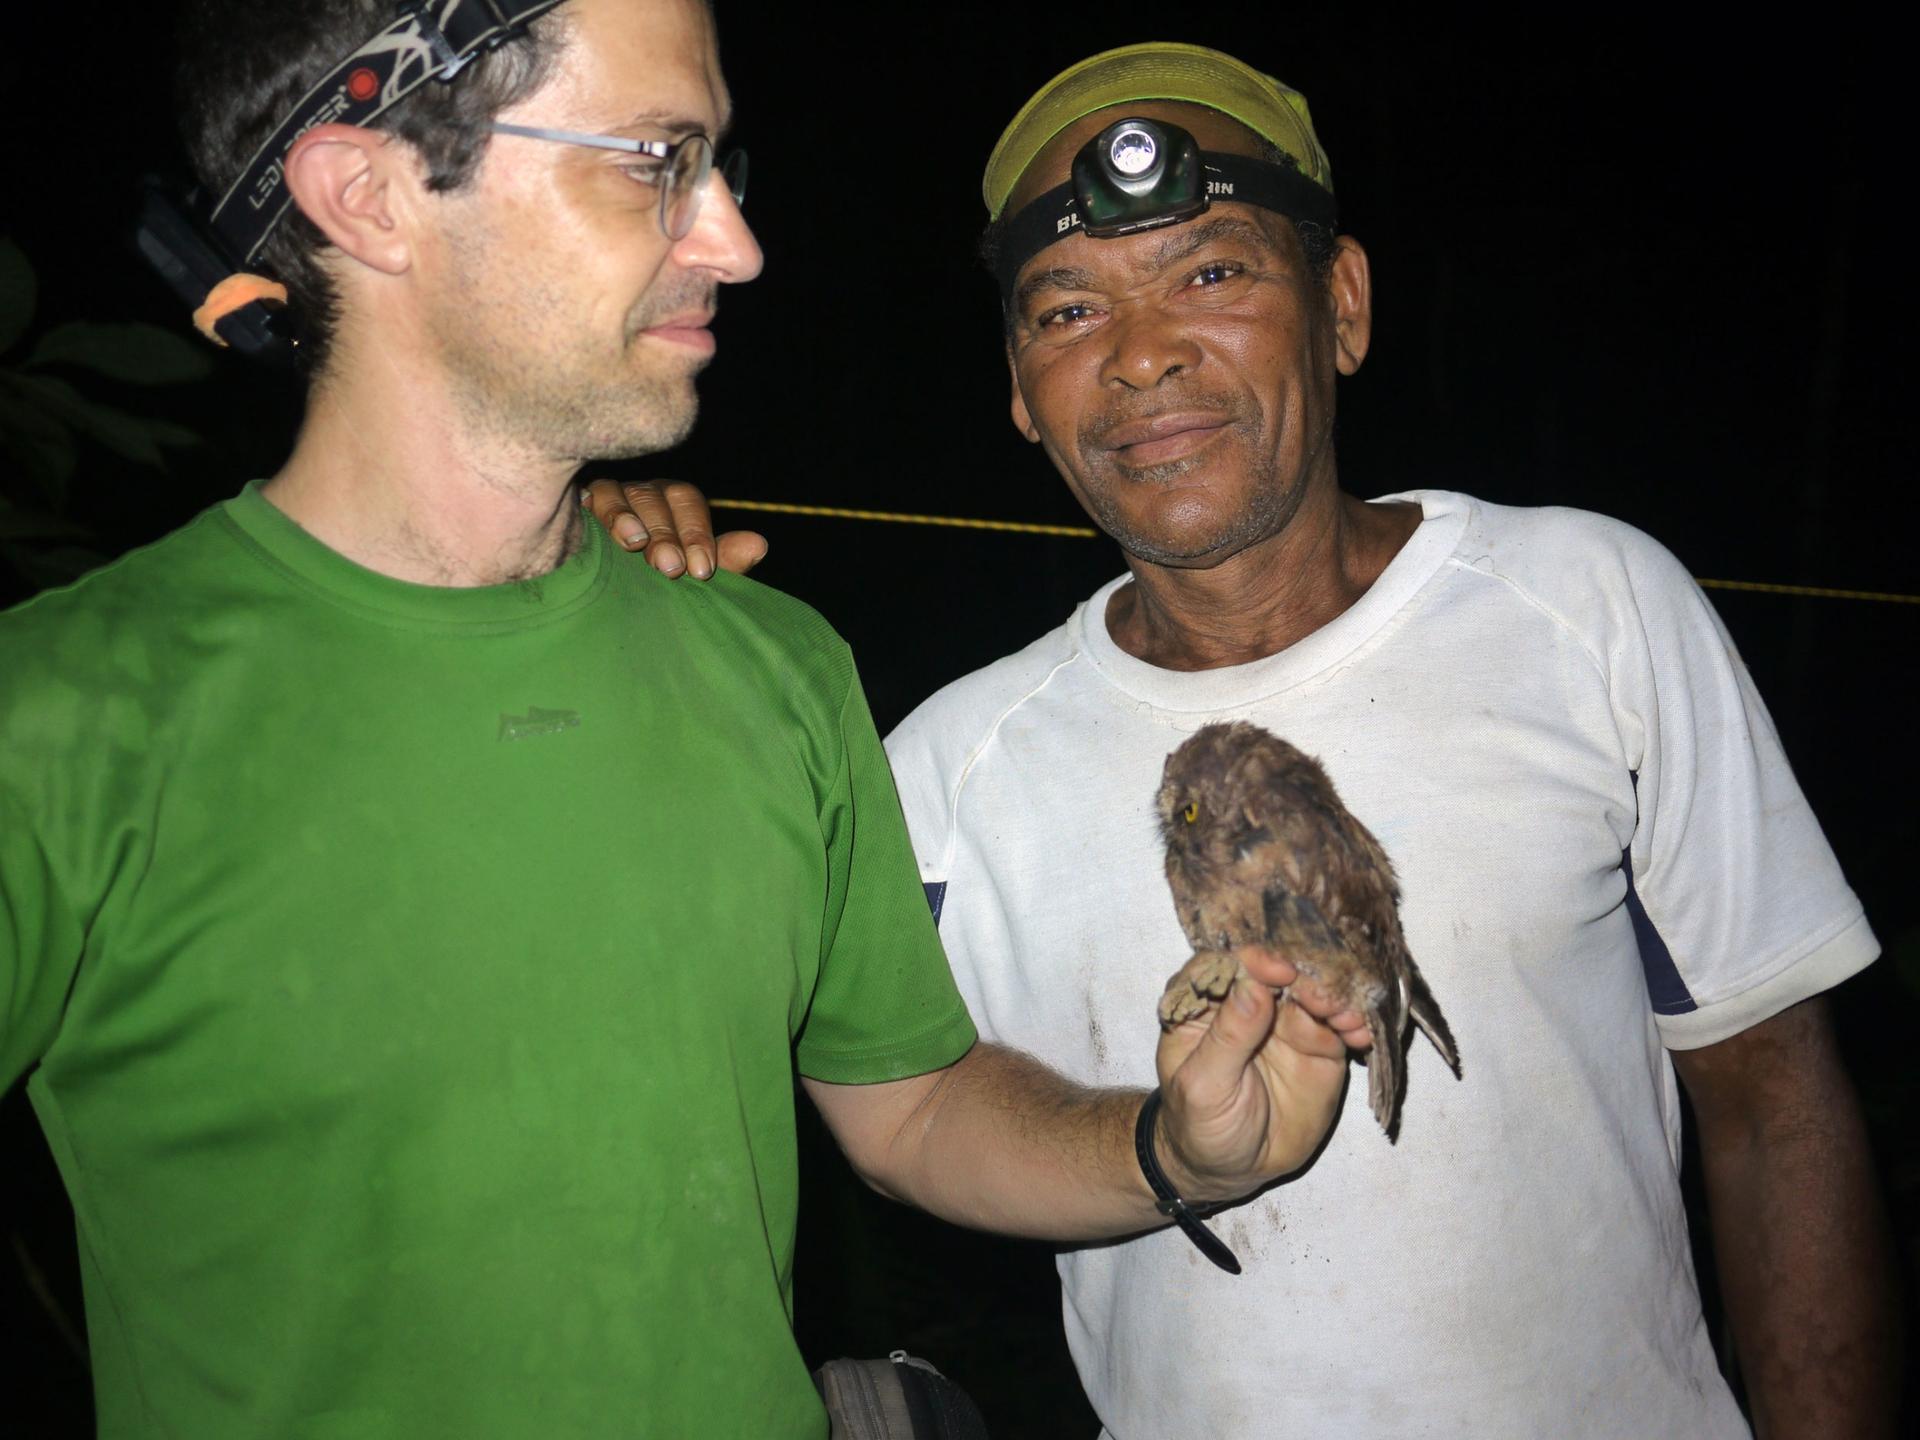 Ceciliano do Bom Jesus (right) , nicknamed Bikegila was an essential partner in finding the owl. To honor his efforts, researcher Martim Melo (left) proposed they give the owl the Latin name Otus bikegila.